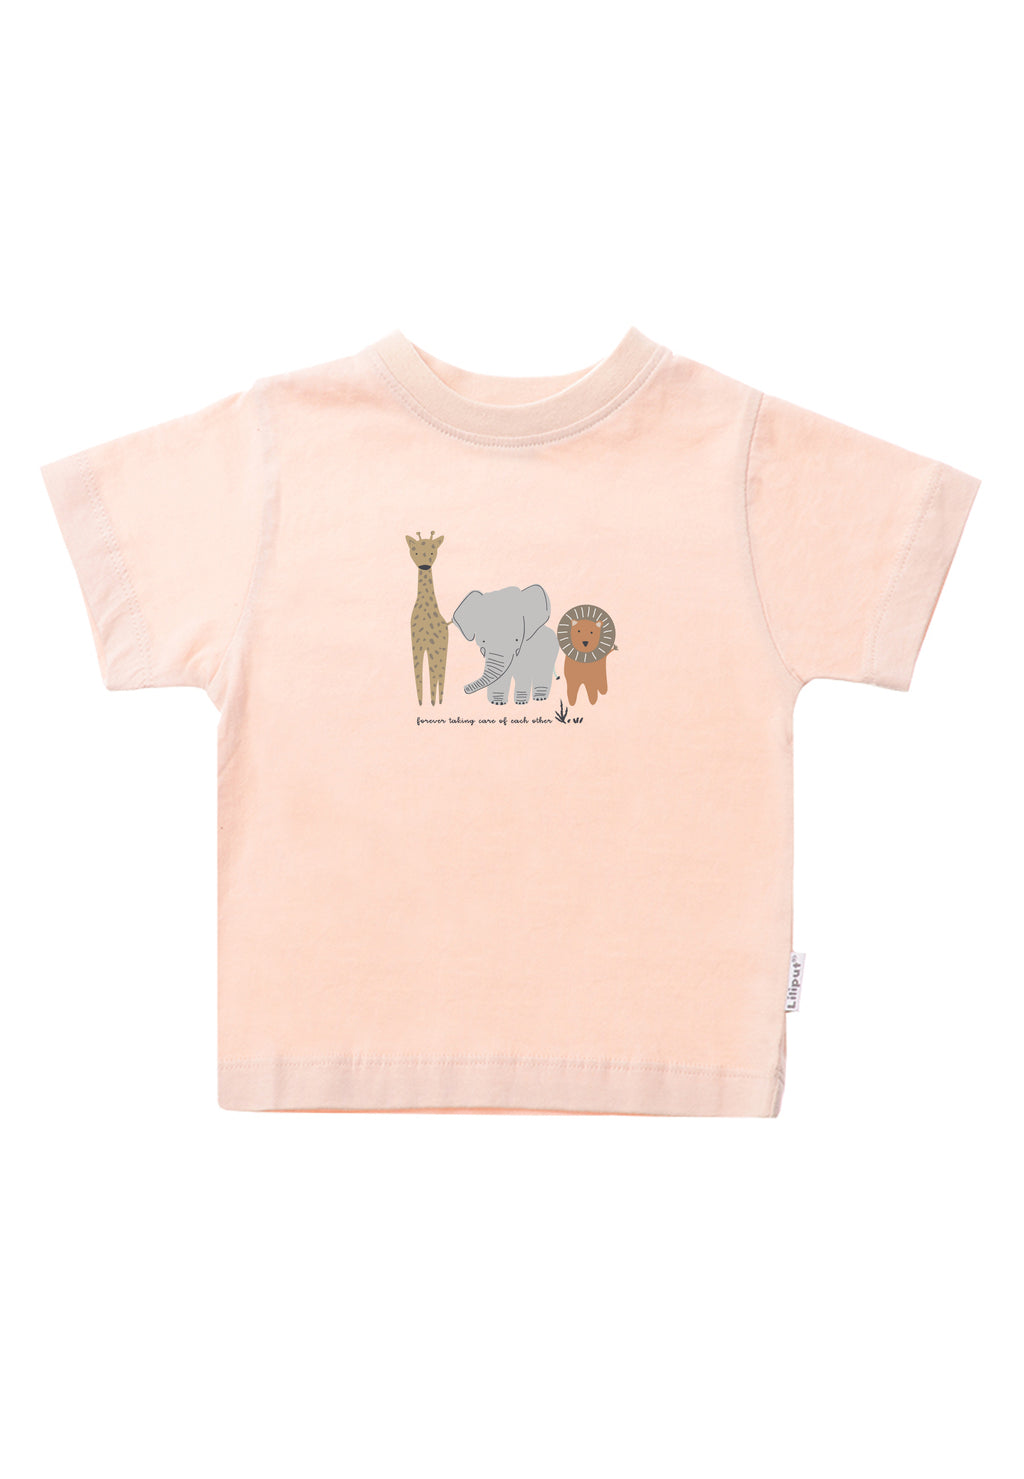 Doppelpack T-Shirts in apricot und rosè mit Animal Prints und Wording "lets explore the world together"